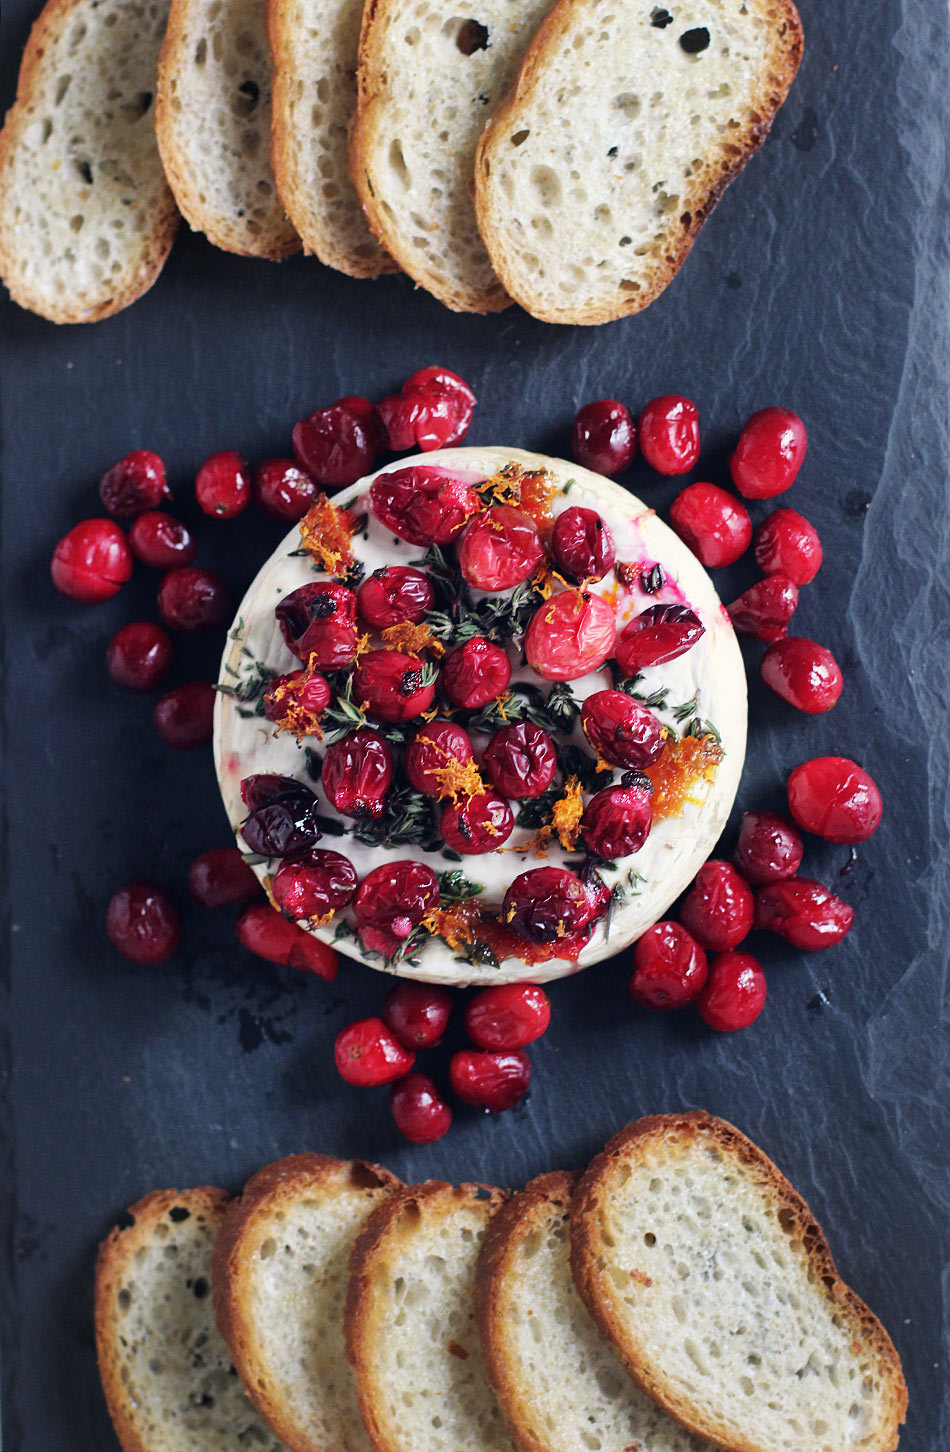 Baked Brie with Maple-Roasted Cranberries